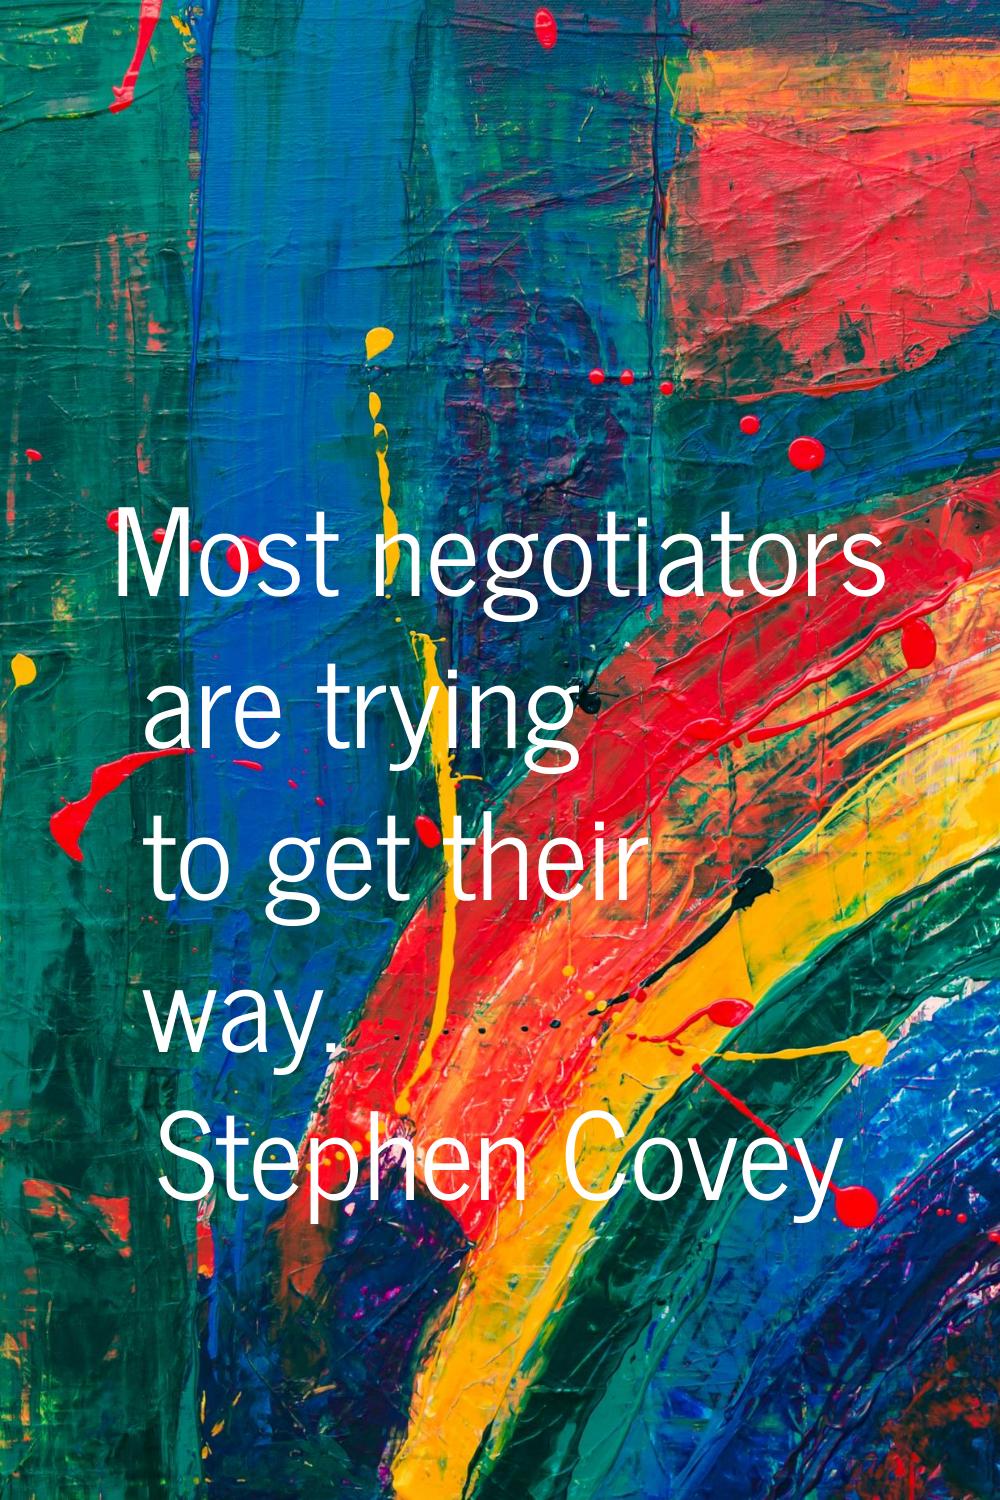 Most negotiators are trying to get their way.